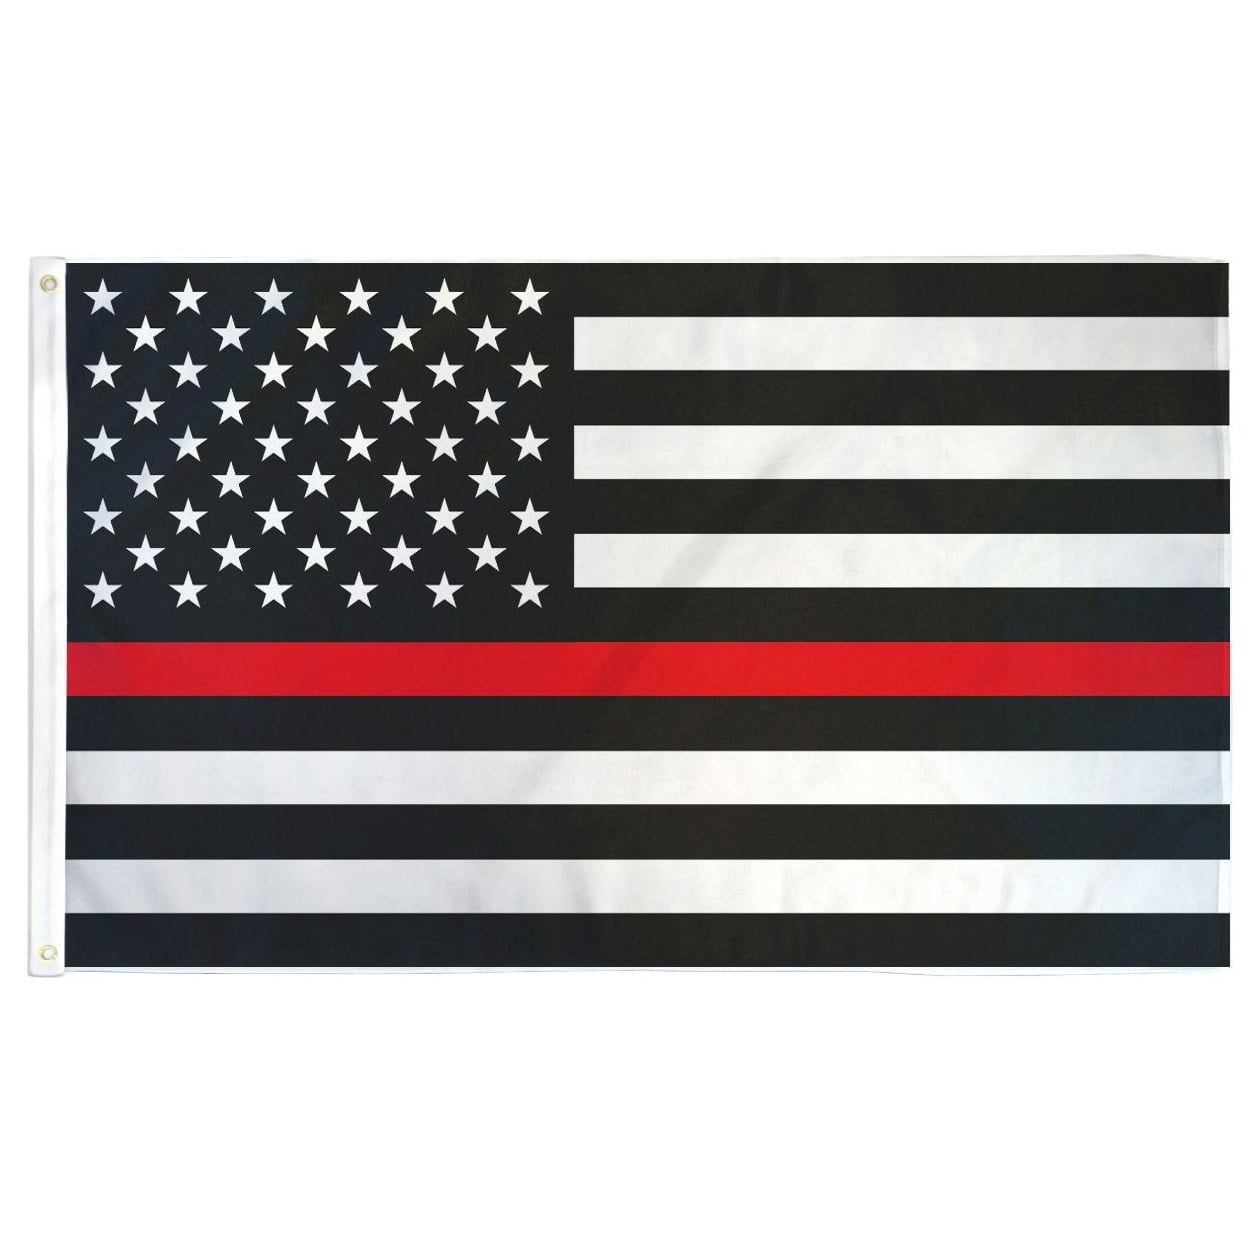 Homissor Thin Blue Green and Red Line Garden Flag American Blue Red Green Stripe All Lives Matter Police Firefighter Military Yard Flags Banner Law Enforcement Police Fireman Army Flag